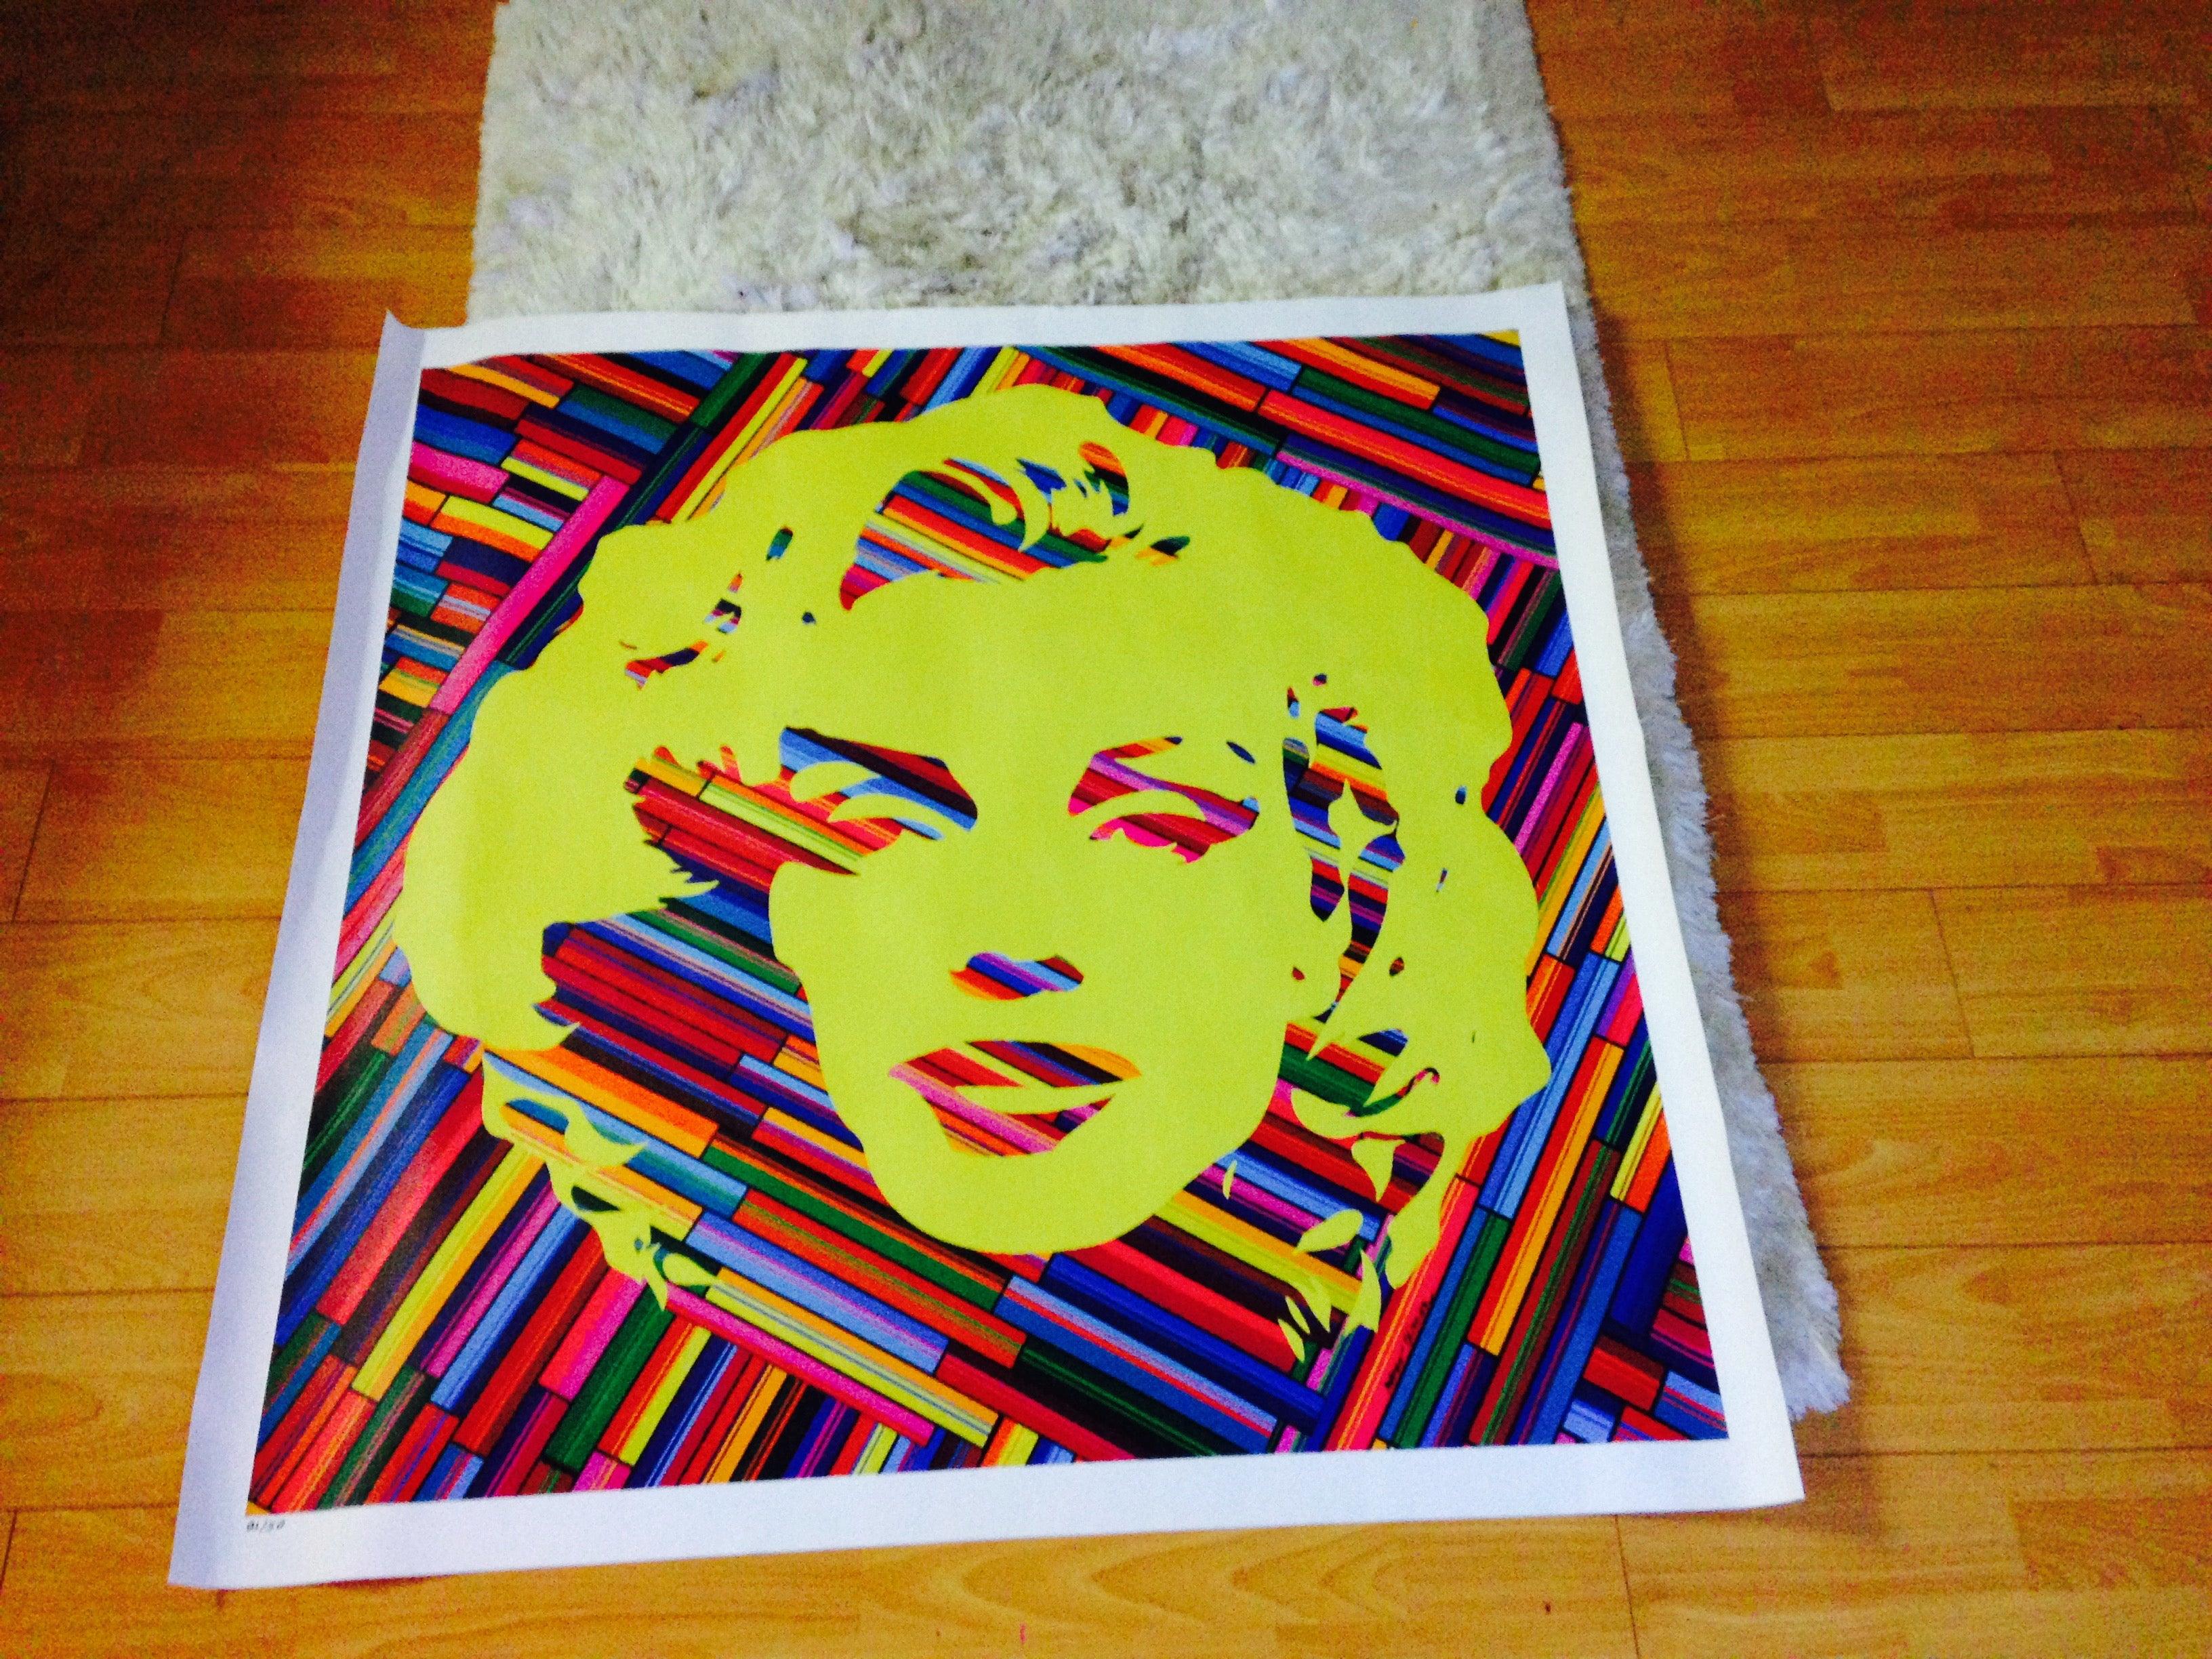               **ANNUAL SUPER SALE UNTIL APRIL 15TH ONLY**
*This Price Won't Be Repeated Again This Year-Take Advantage Of It*

Celebrating the one and only Marilyn Monroe by Mauro Oliveira. 

Limited edition of 30 museum quality Giclee prints on